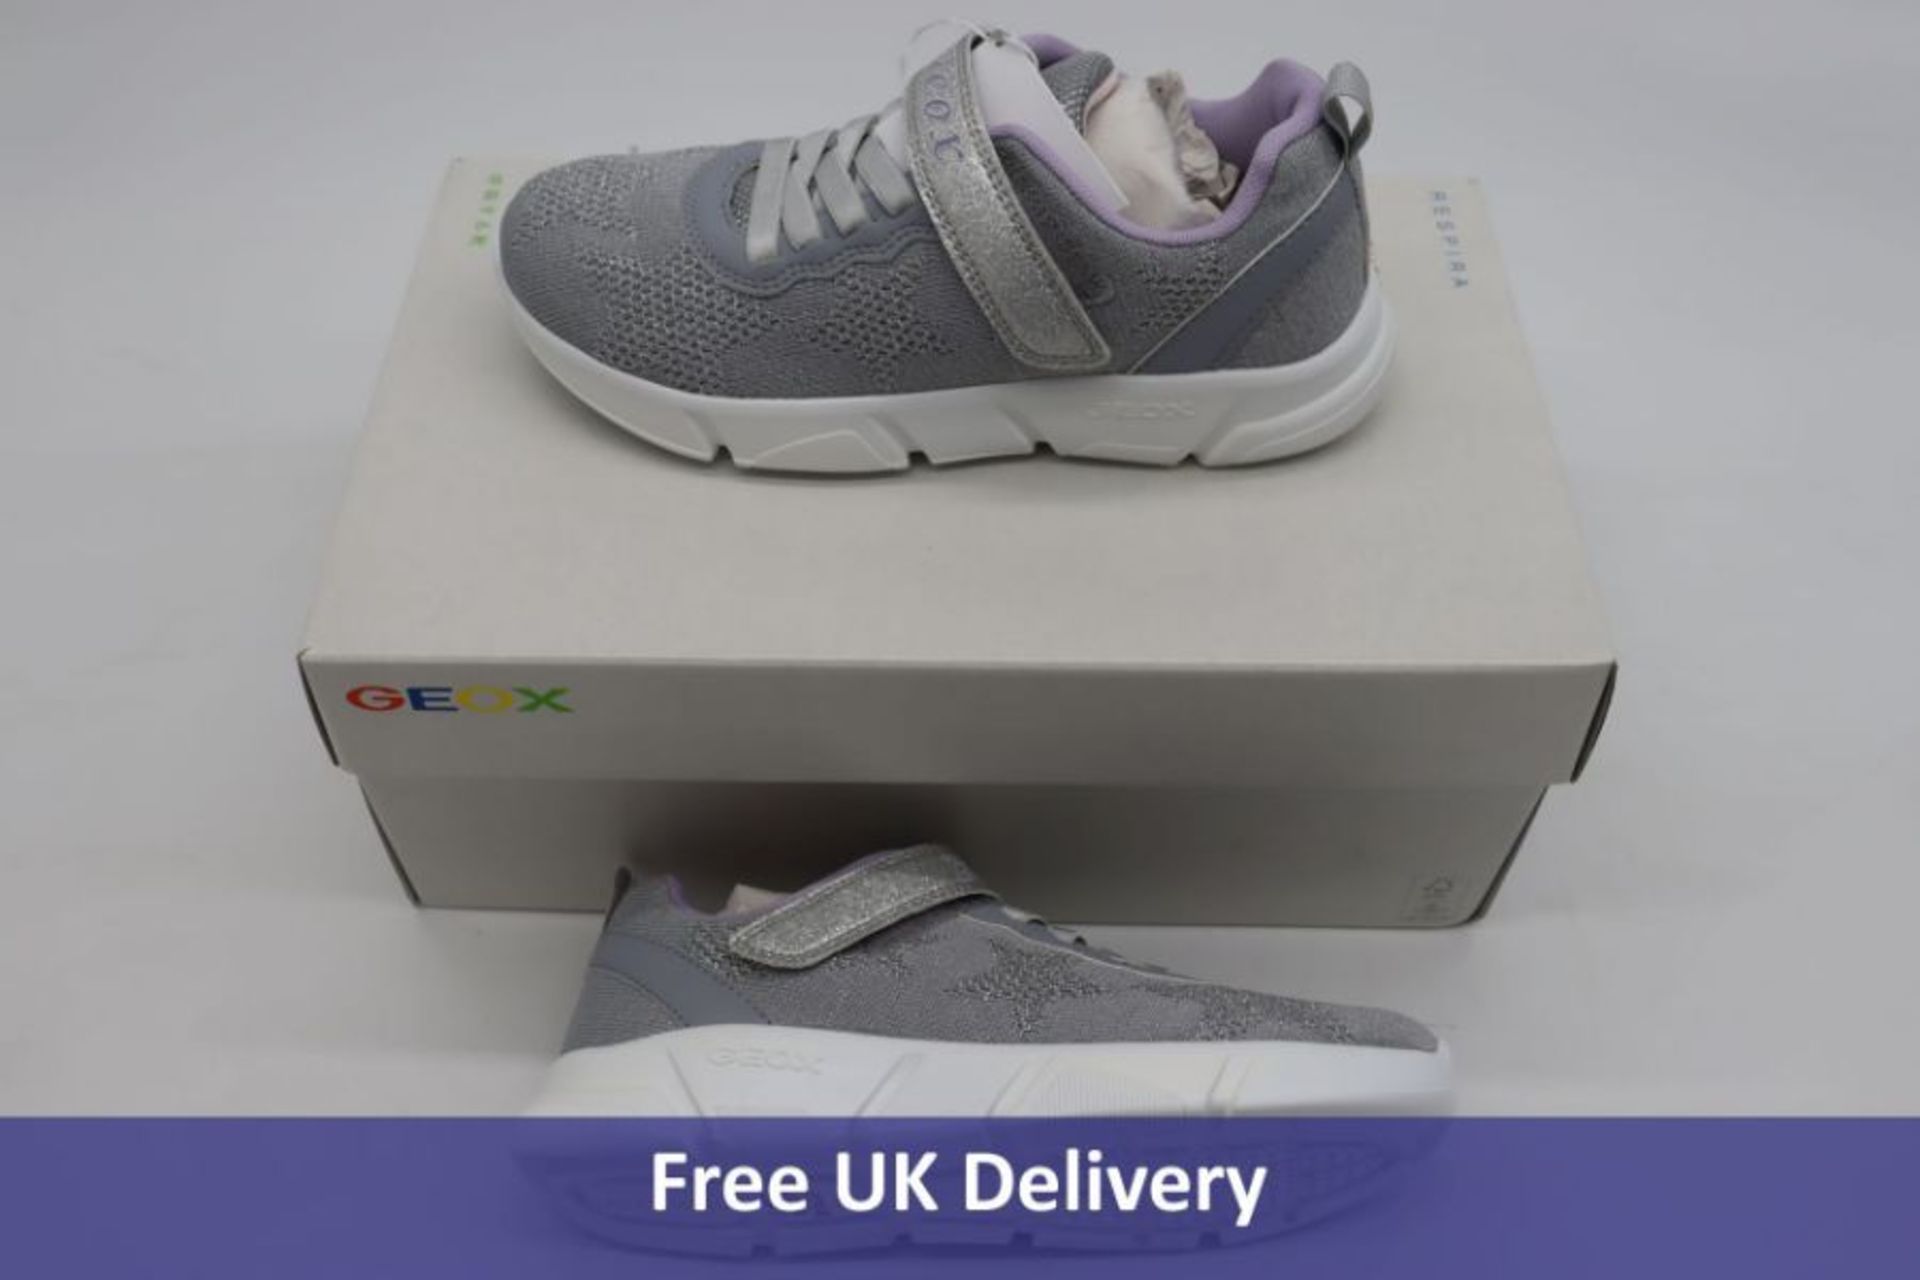 Geox J Aril G trainers, Silver, Lilac, UK 3